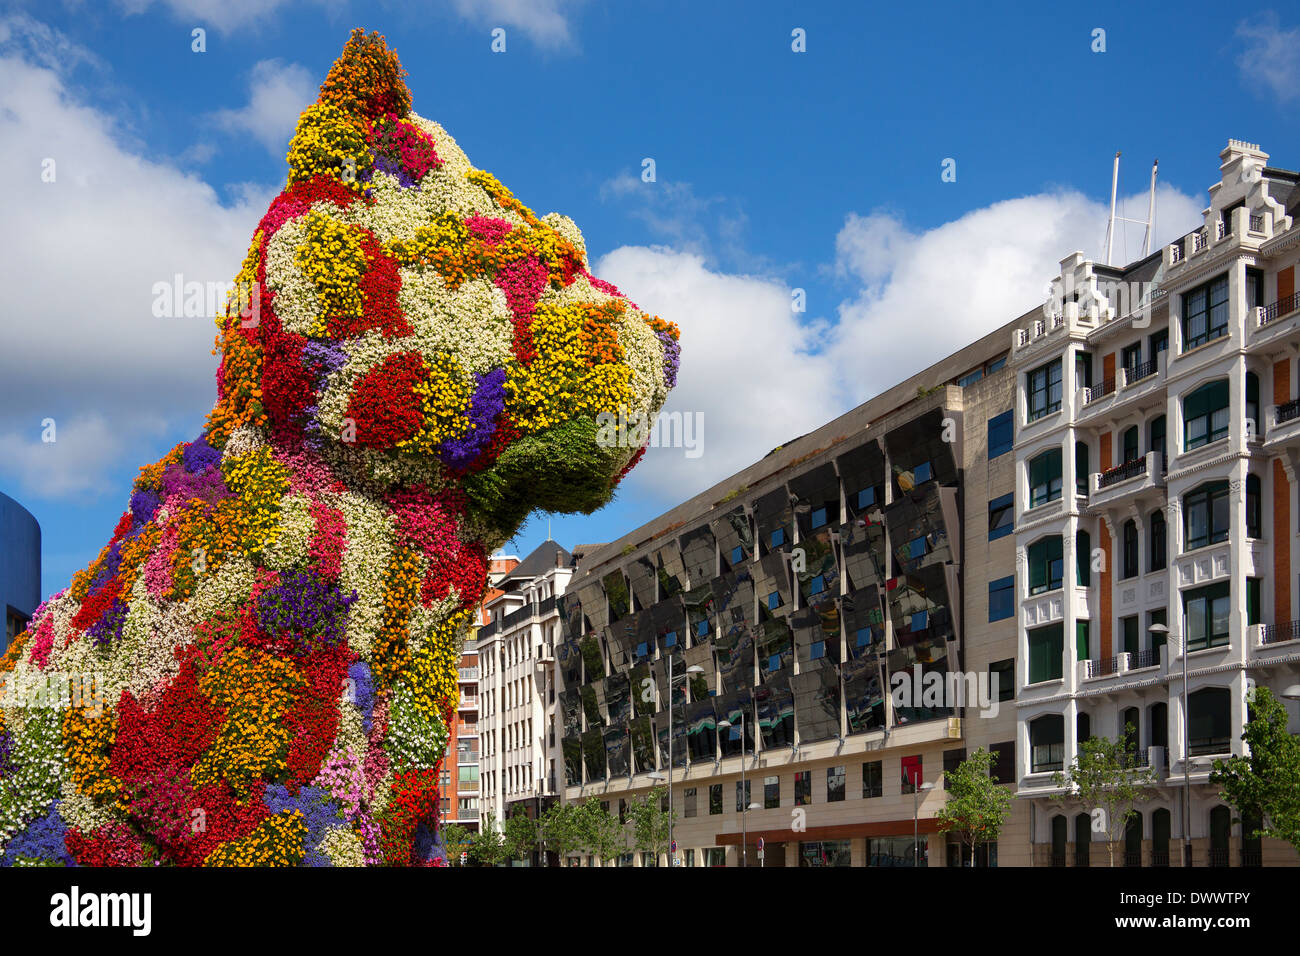 The 'Puppy' near the Guggenheim Museum in the seaport of Bilbao in the province of Biscay in northern Spain. Stock Photo